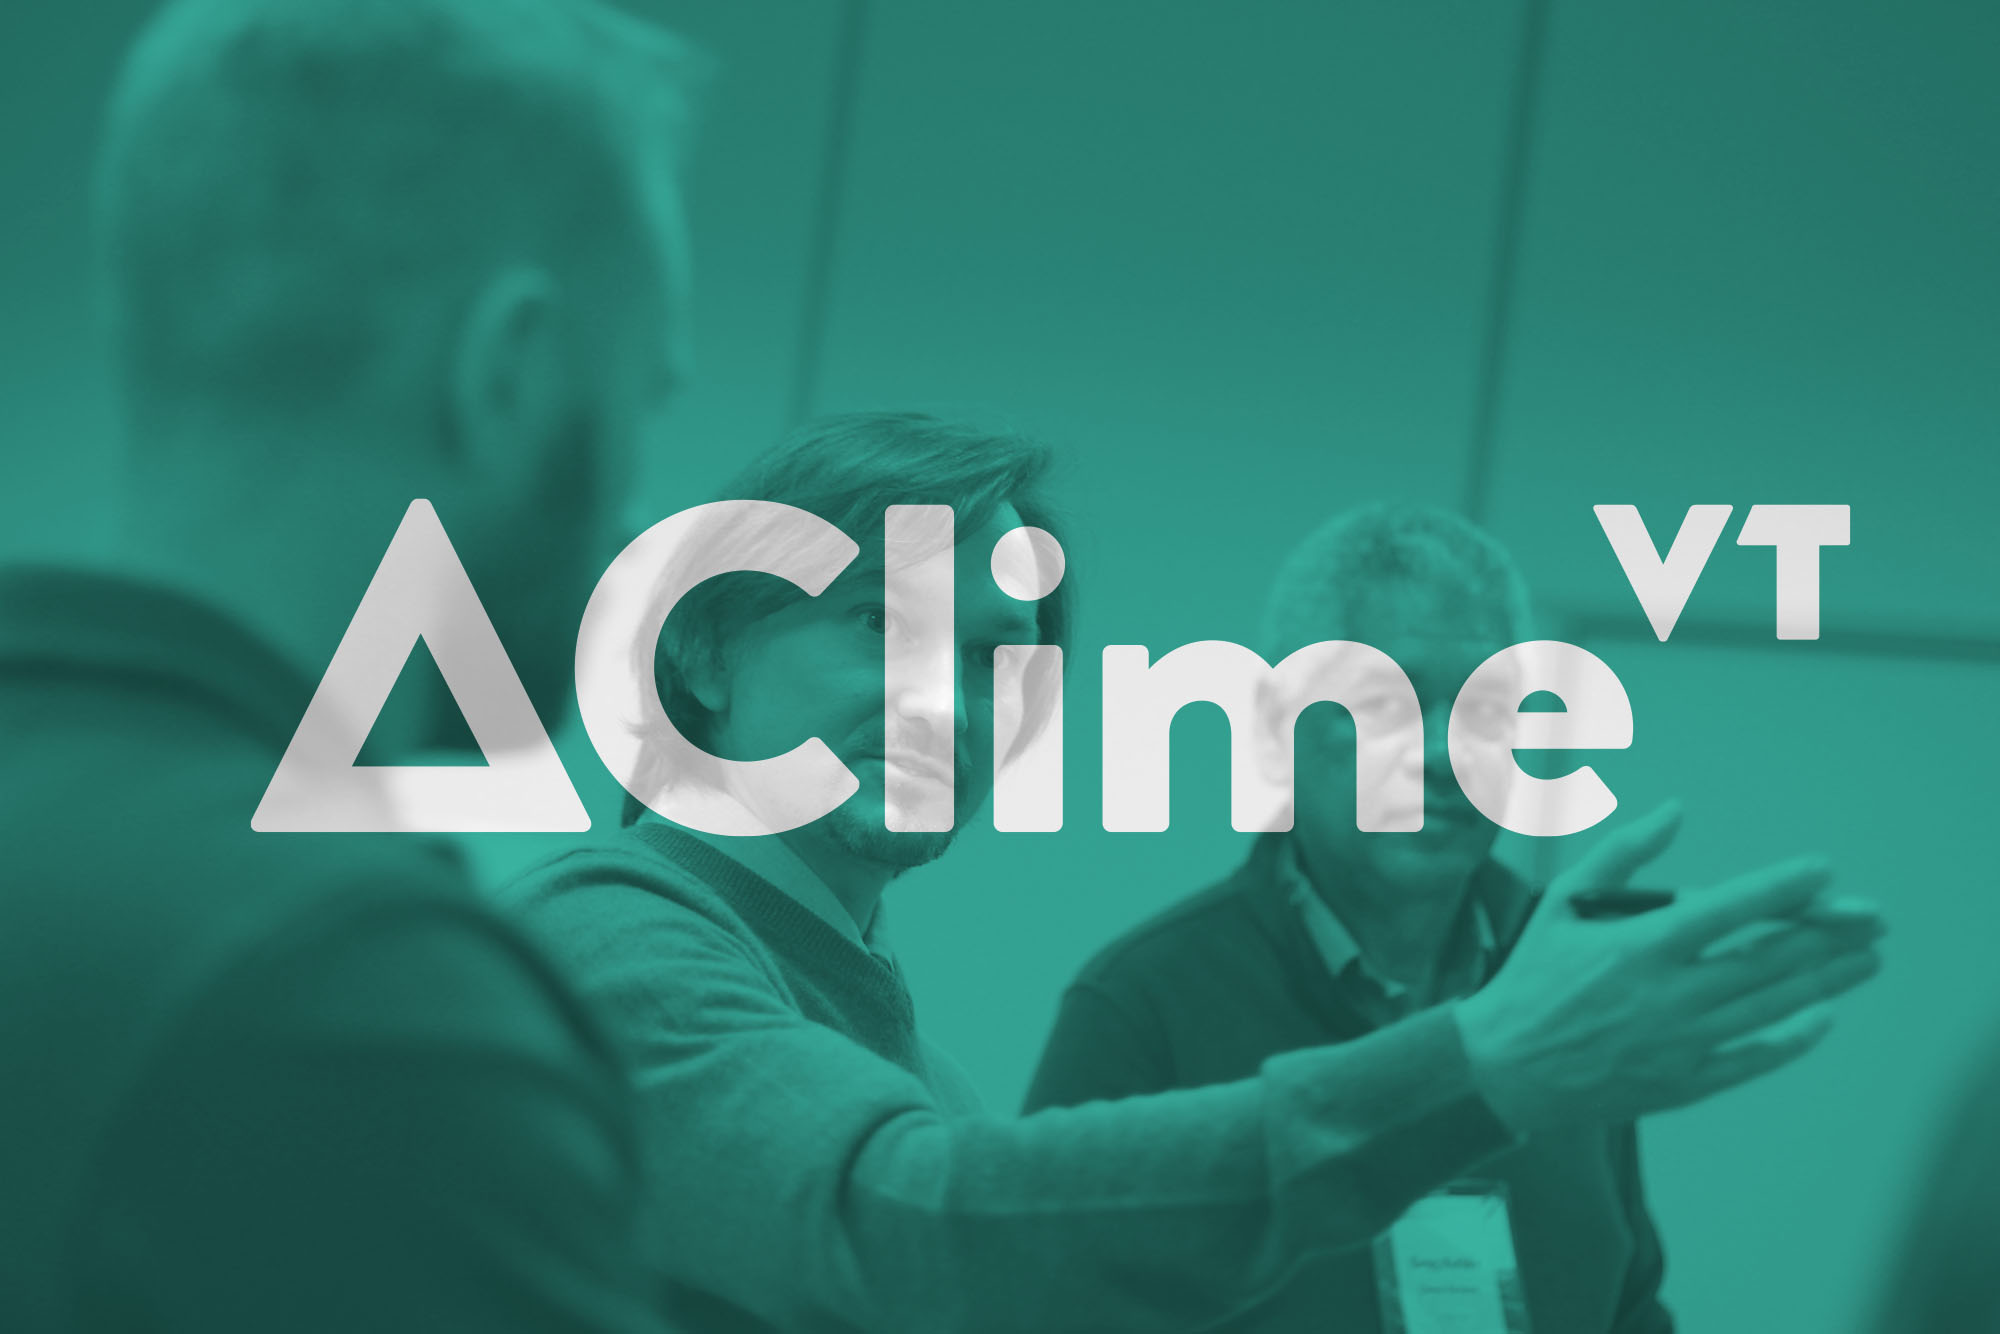 DeltaClimeVT climate economy business accelerator selects Energy 2021 cohort and kicks off virtual programming